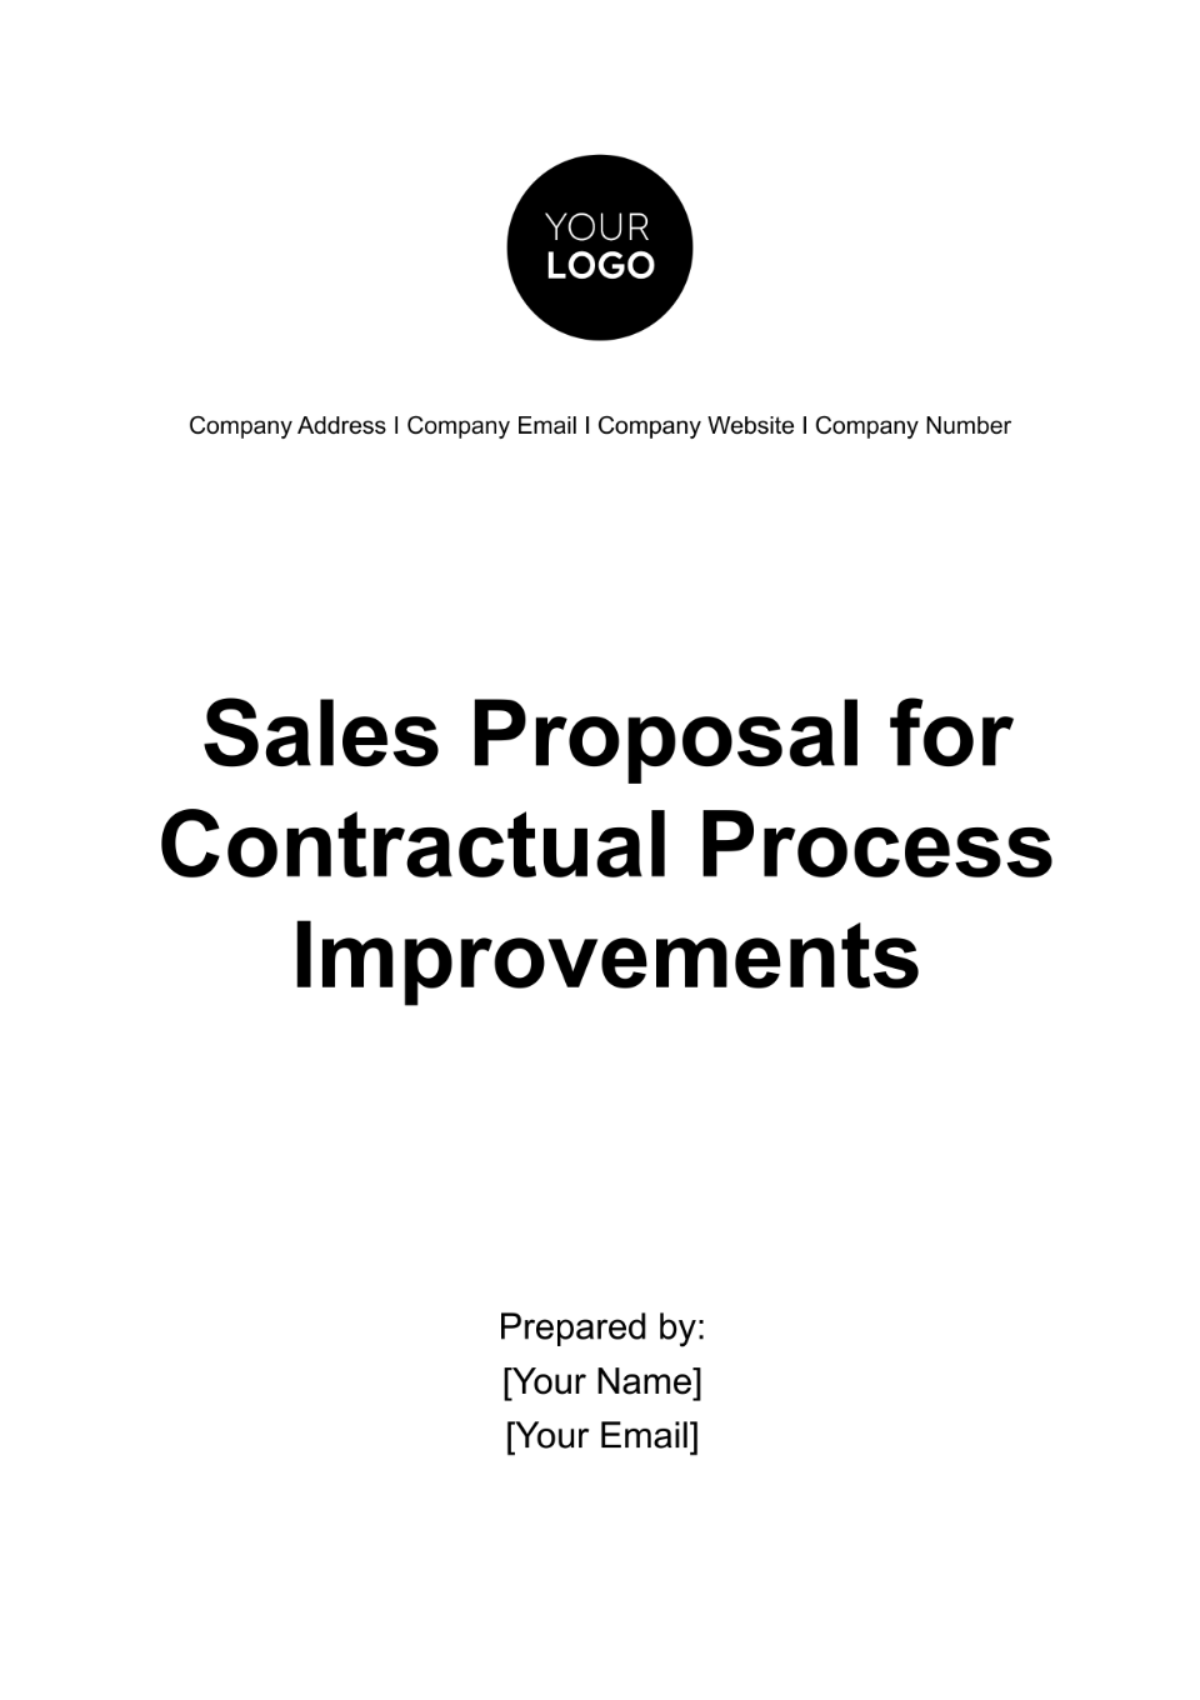 Free Sales Proposal for Contractual Process Improvements Template